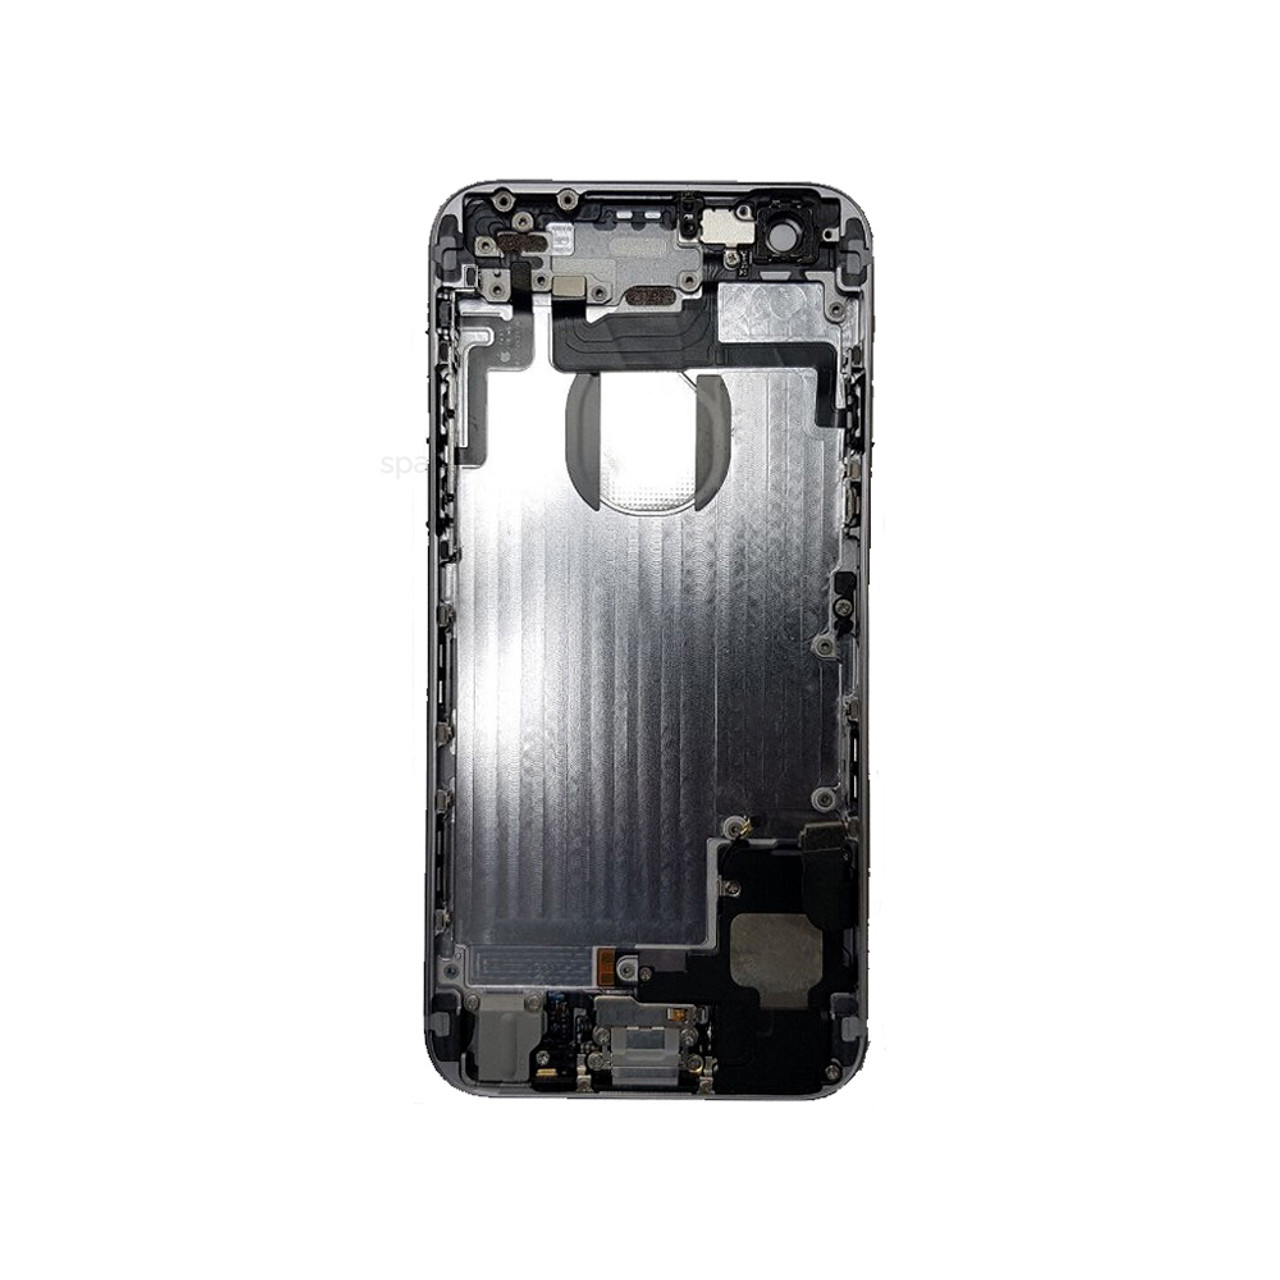 iPhone 6 Housing Chassis With Parts Space Grey Replacement